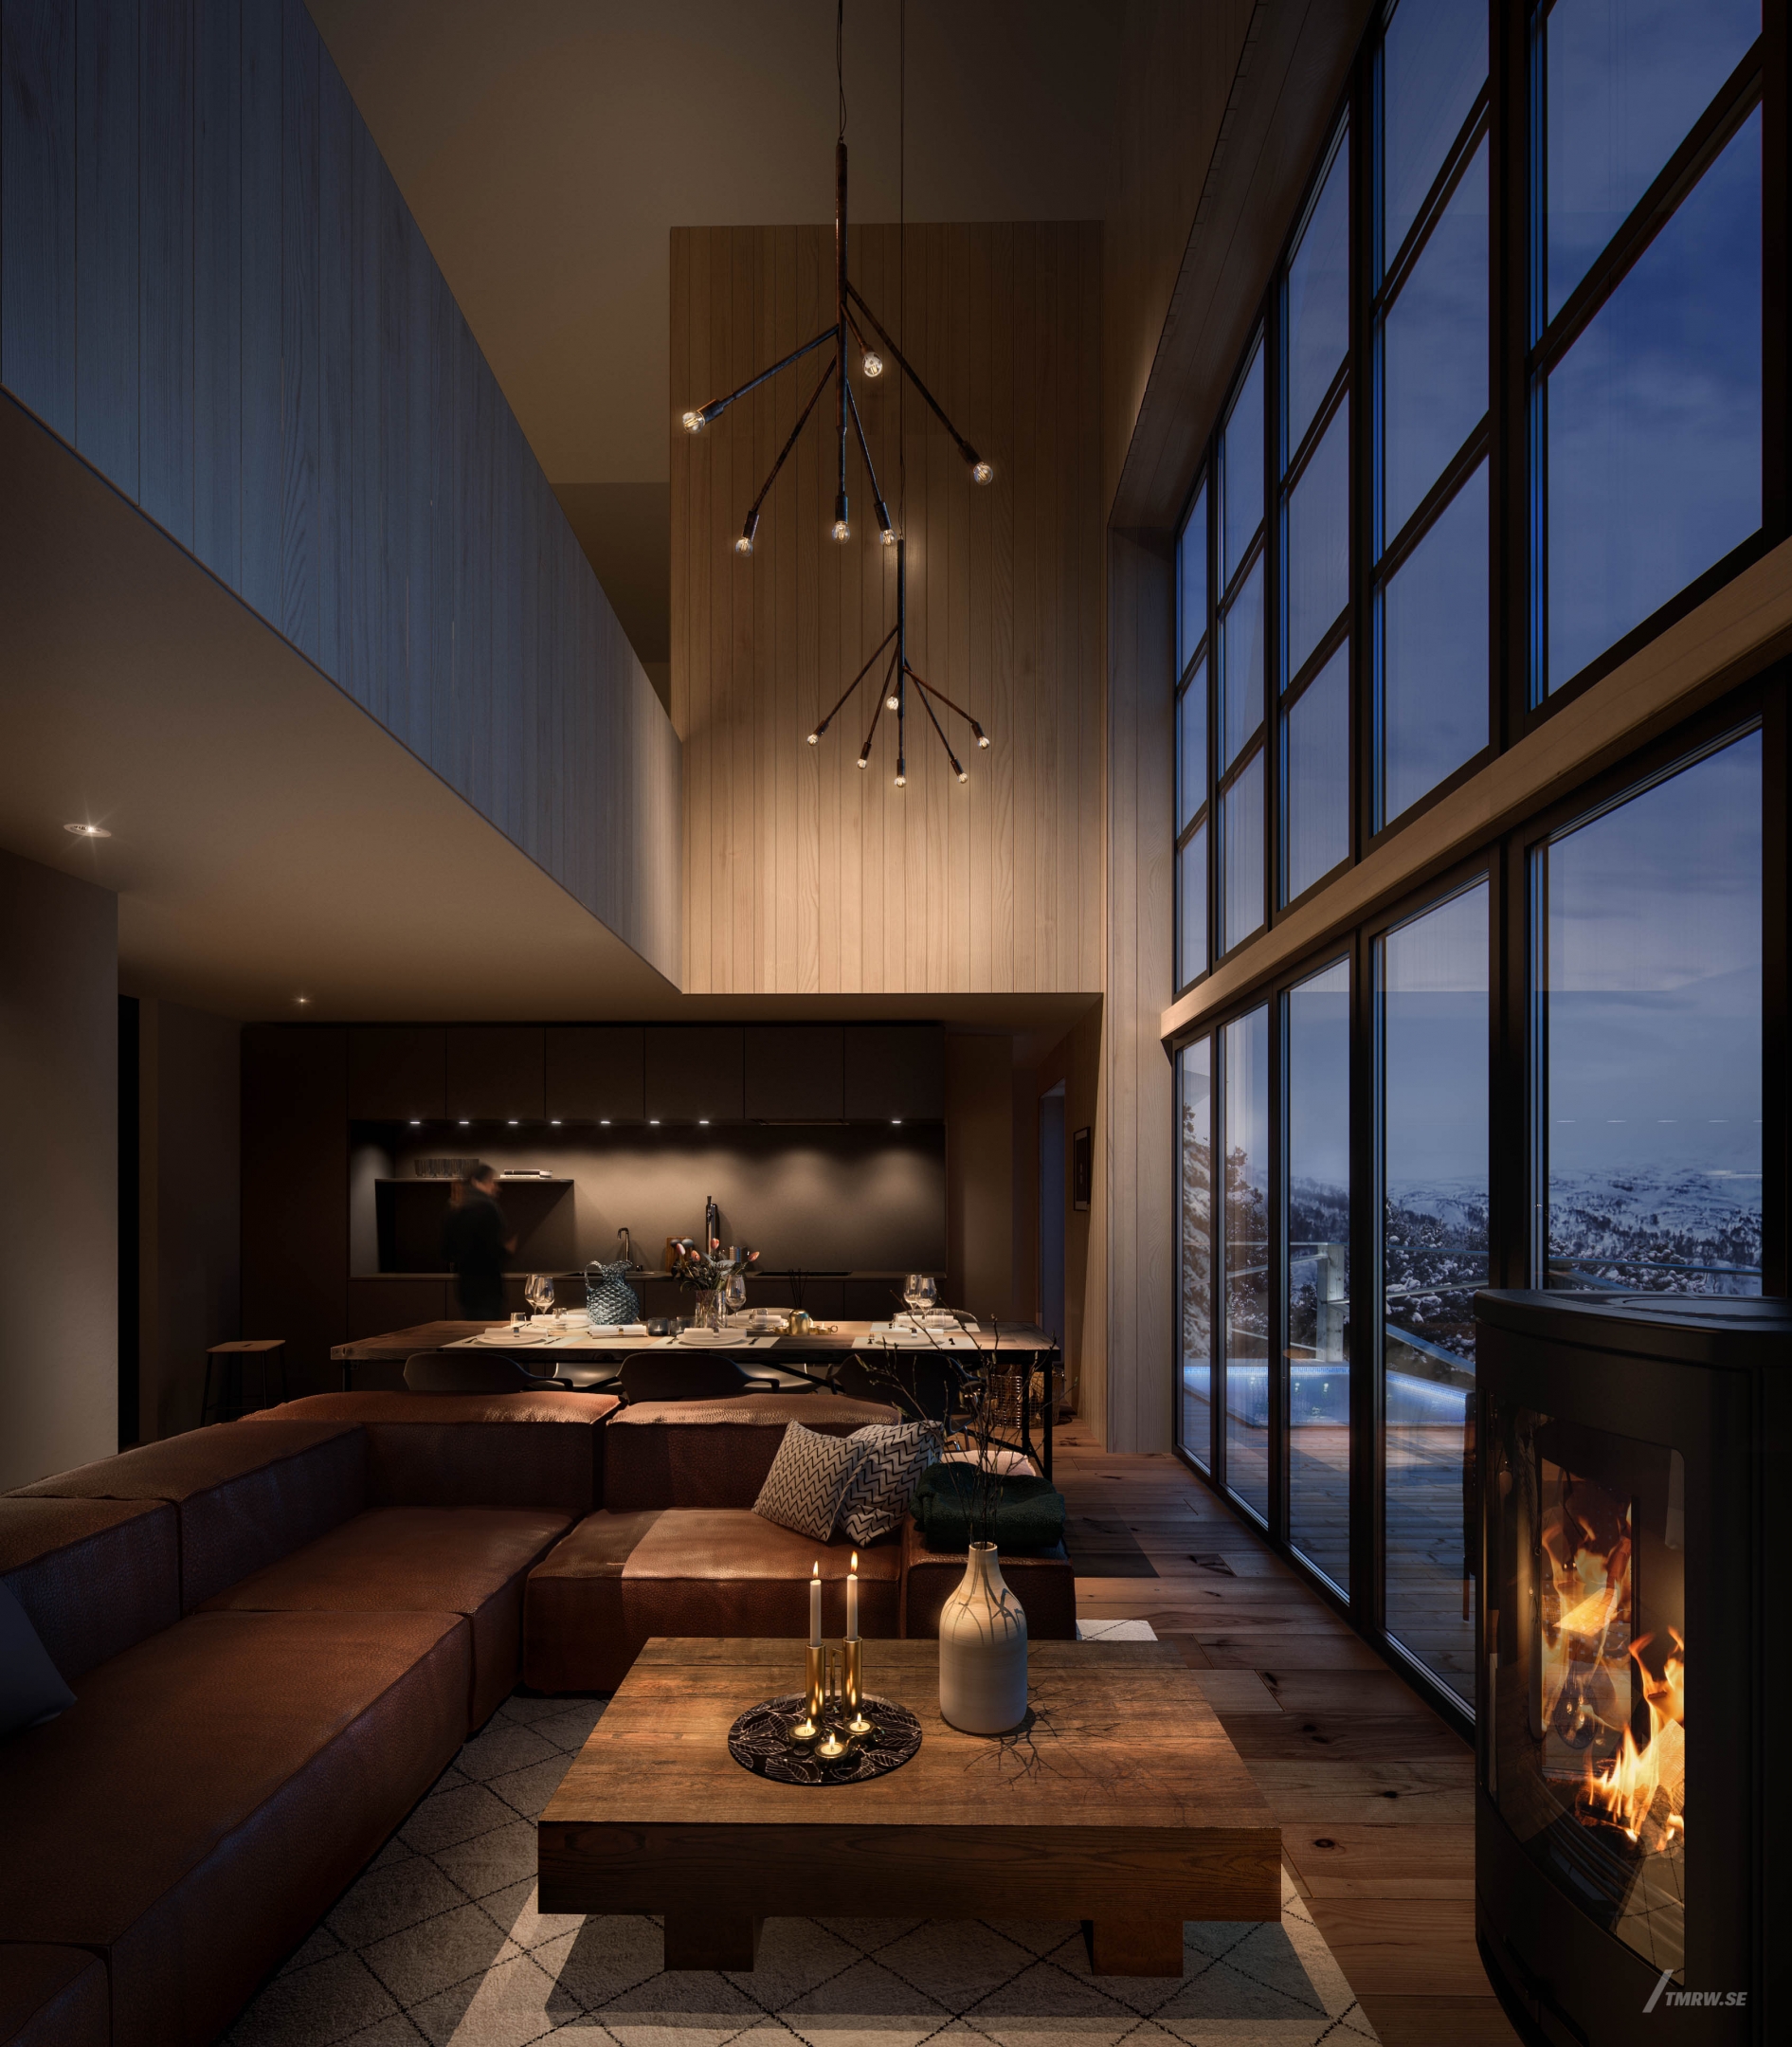 Architectural visualization of Hills365 for Bleck, interior of a living room in dusk, cosy fire stove